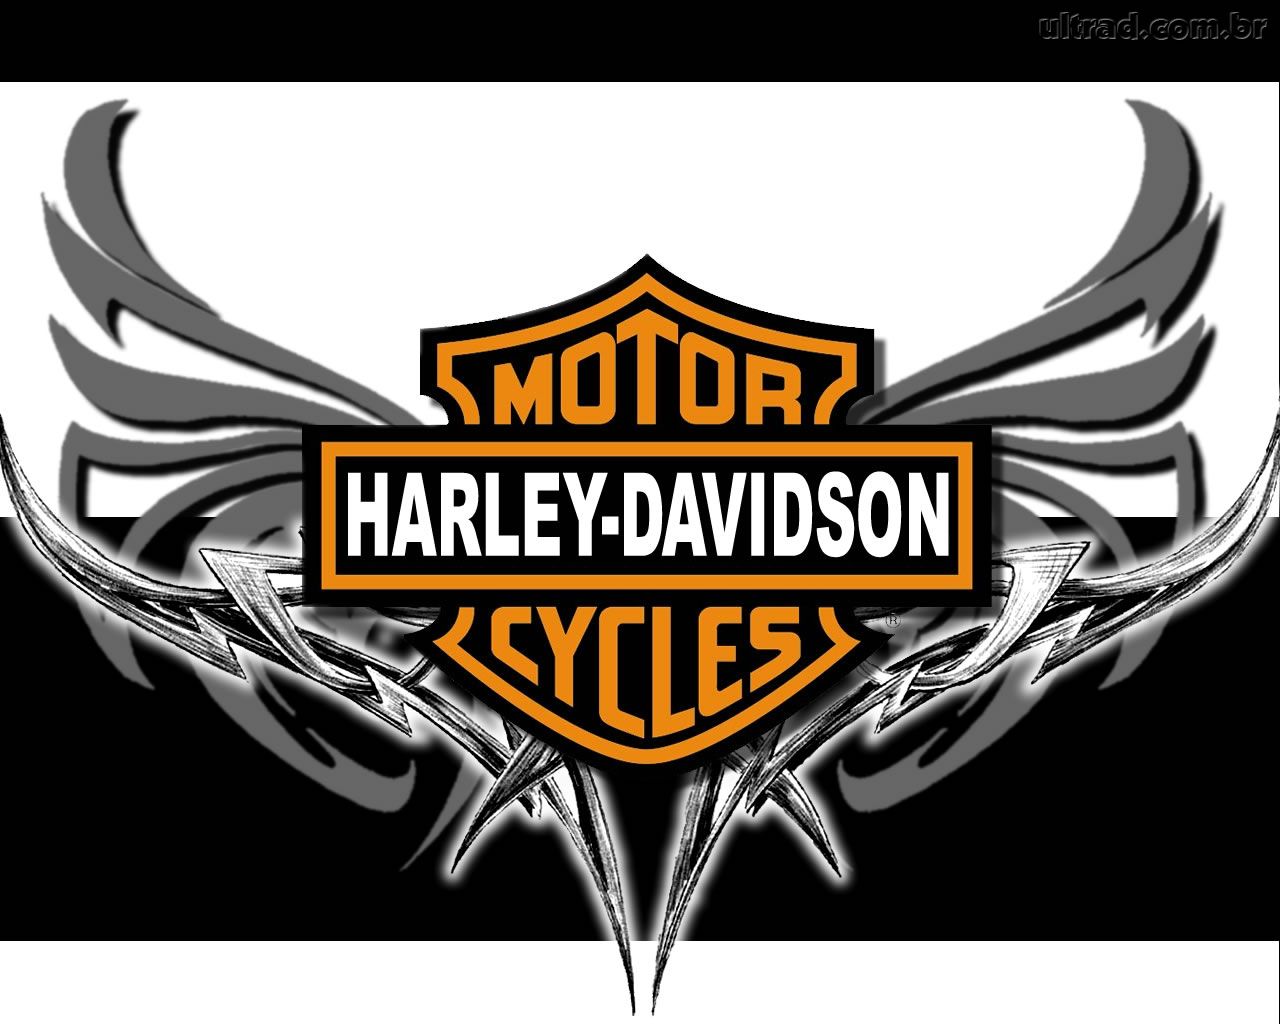 1000 Harley Davidson Wallpaper Harley Davidson Wallpaper Collection 1280x1024